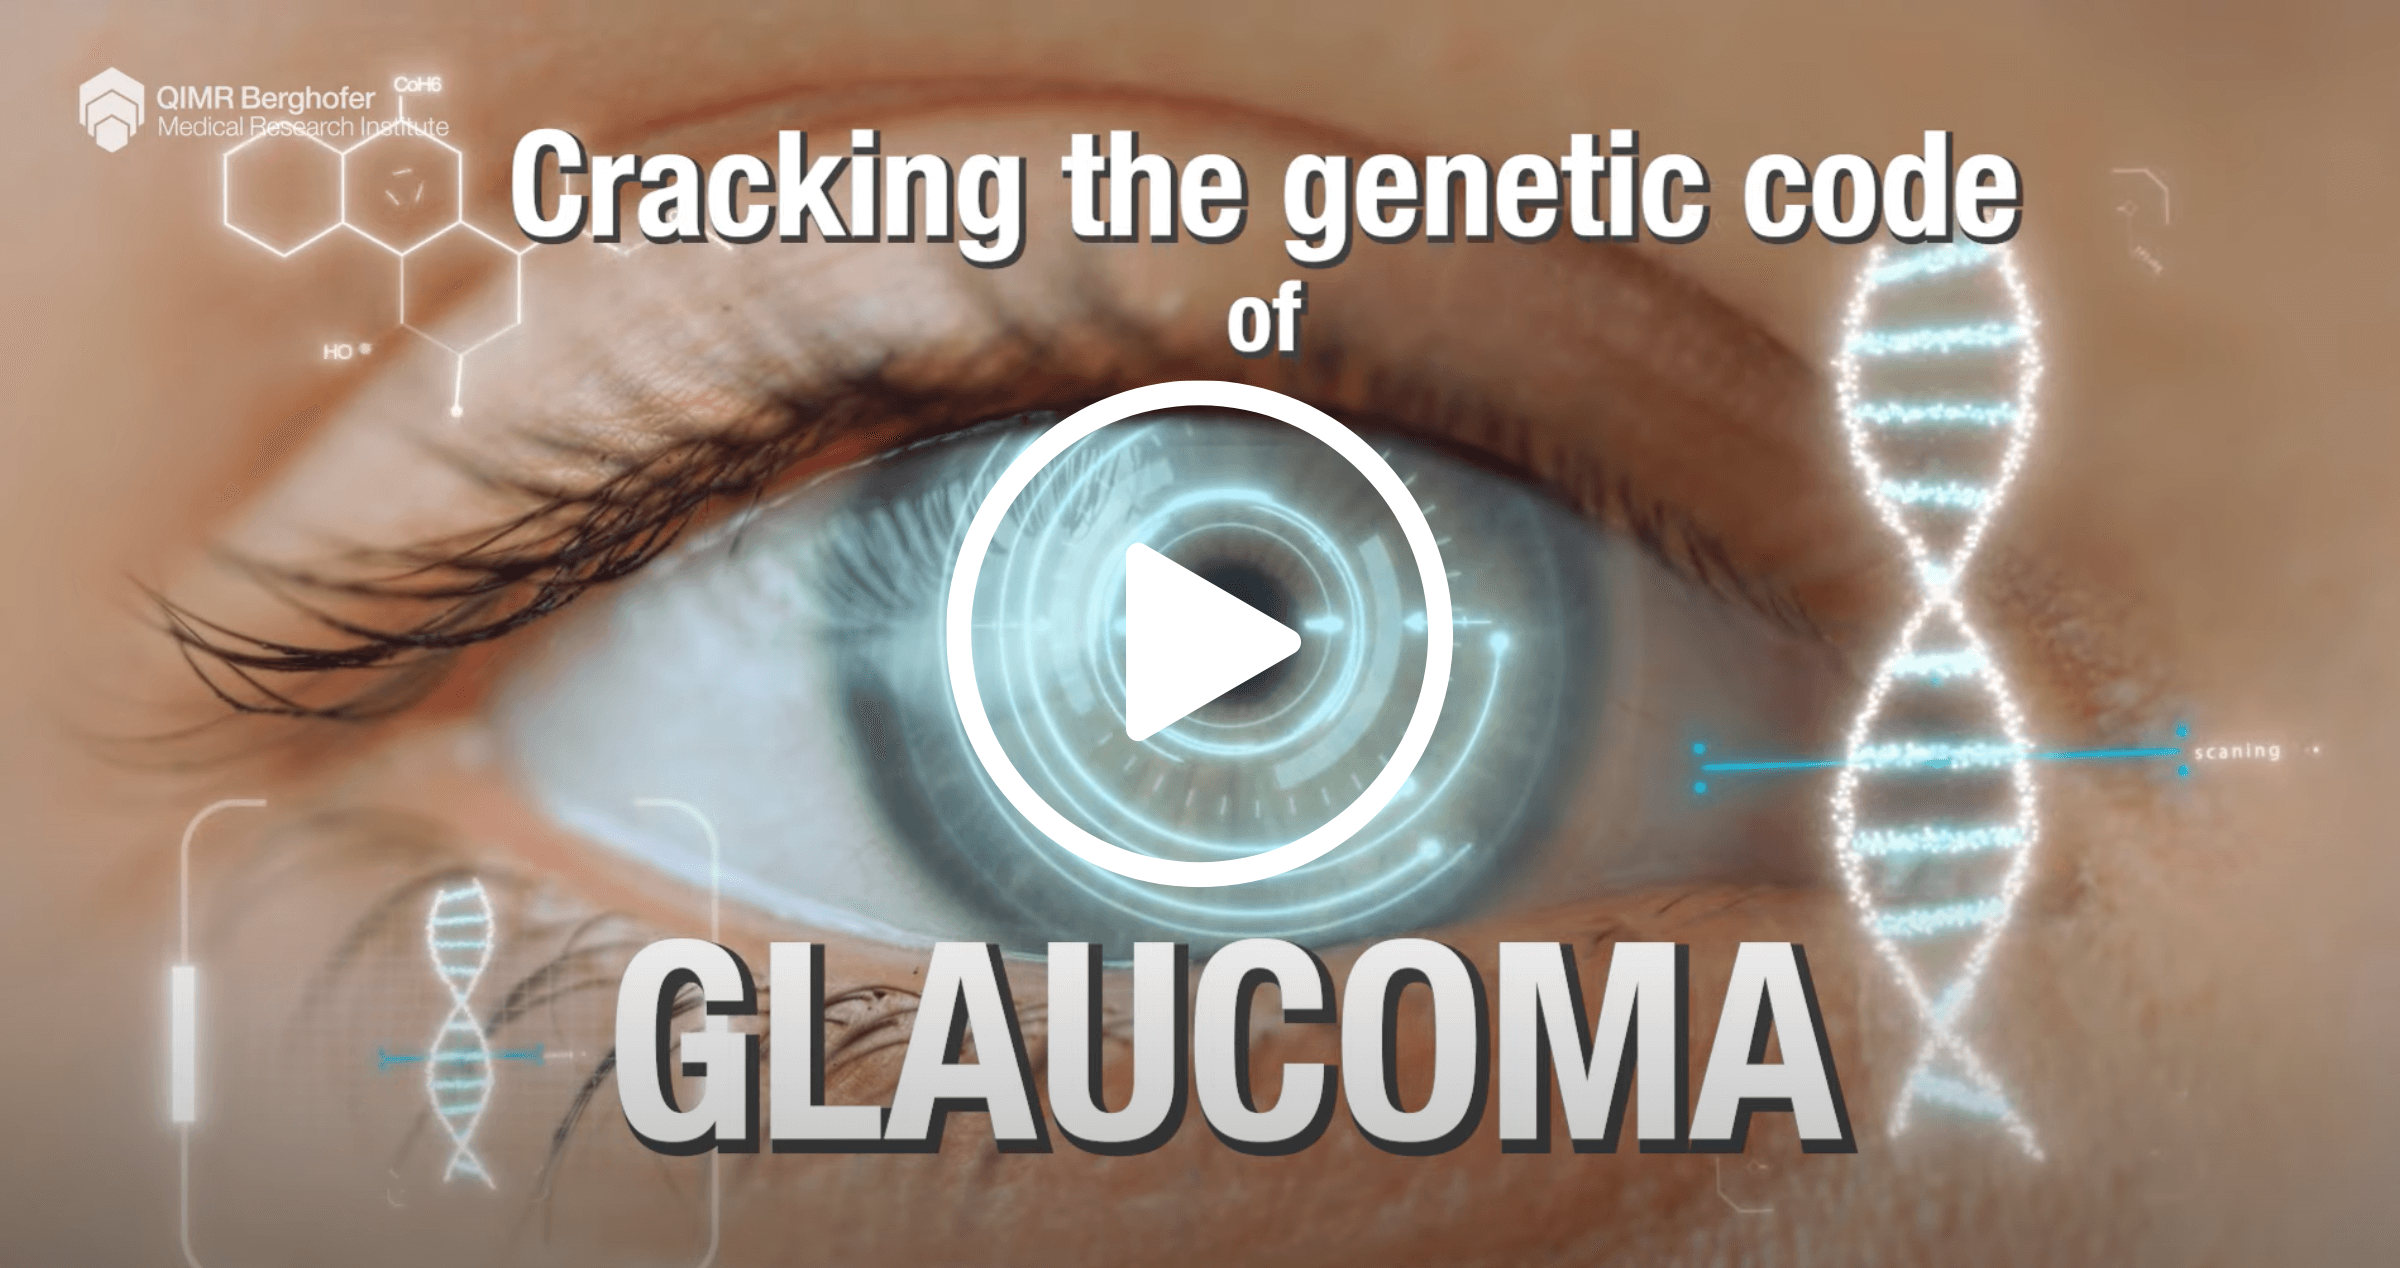 Video: Genetic Discovery Could Help Prevent Irreversible Blindness In People With Glaucoma